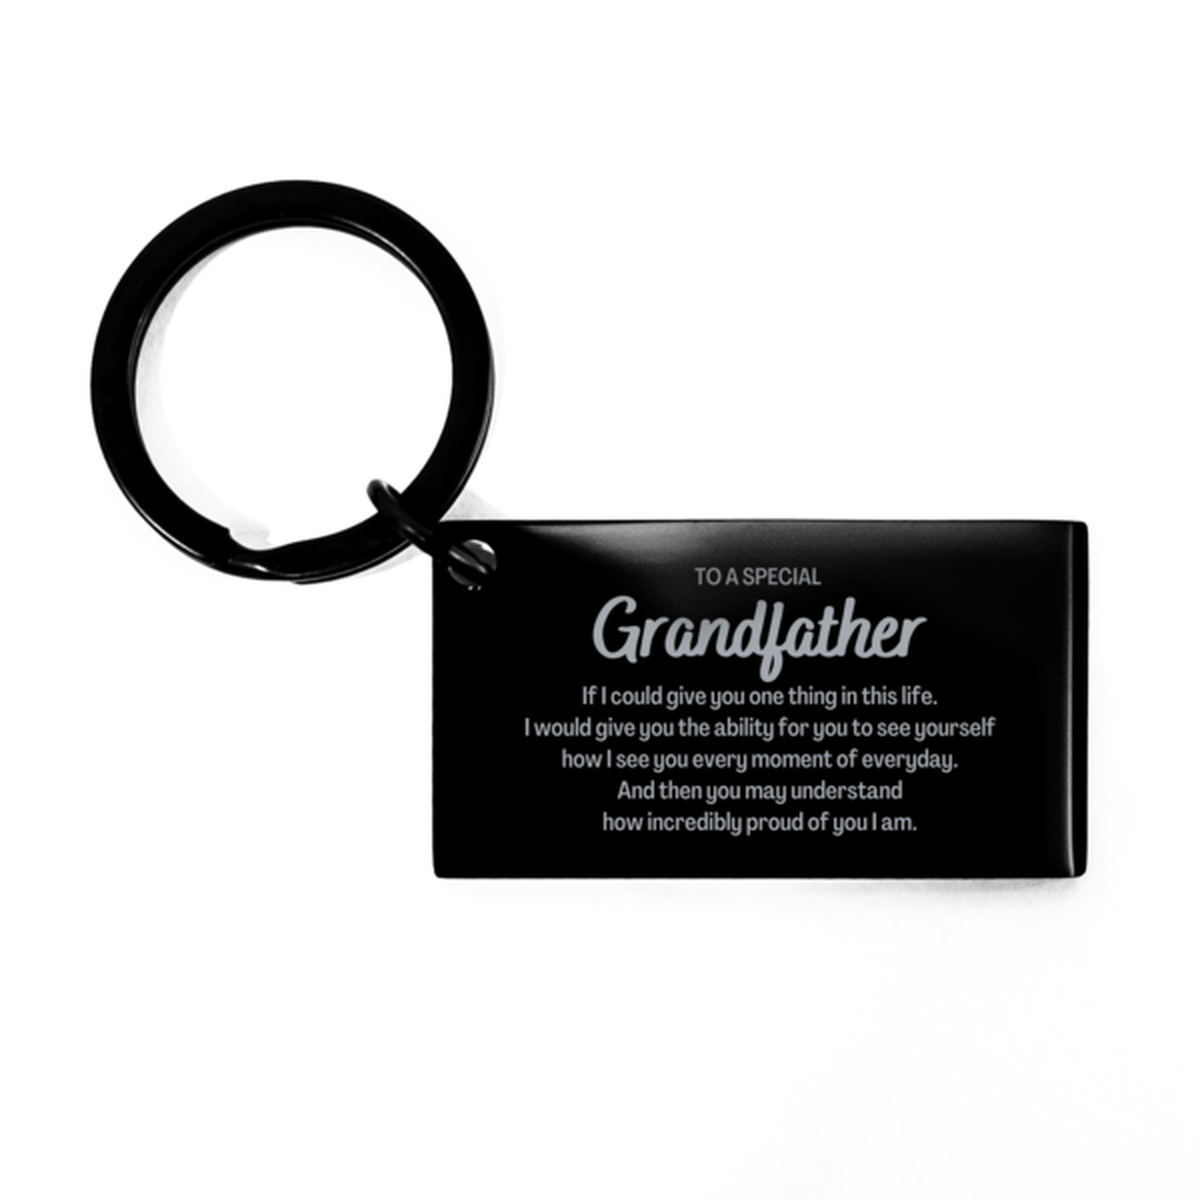 To My Grandfather Keychain, Gifts For Grandfather Engraved, Inspirational Gifts for Christmas Birthday, Epic Gifts for Grandfather To A Special Grandfather how incredibly proud of you I am